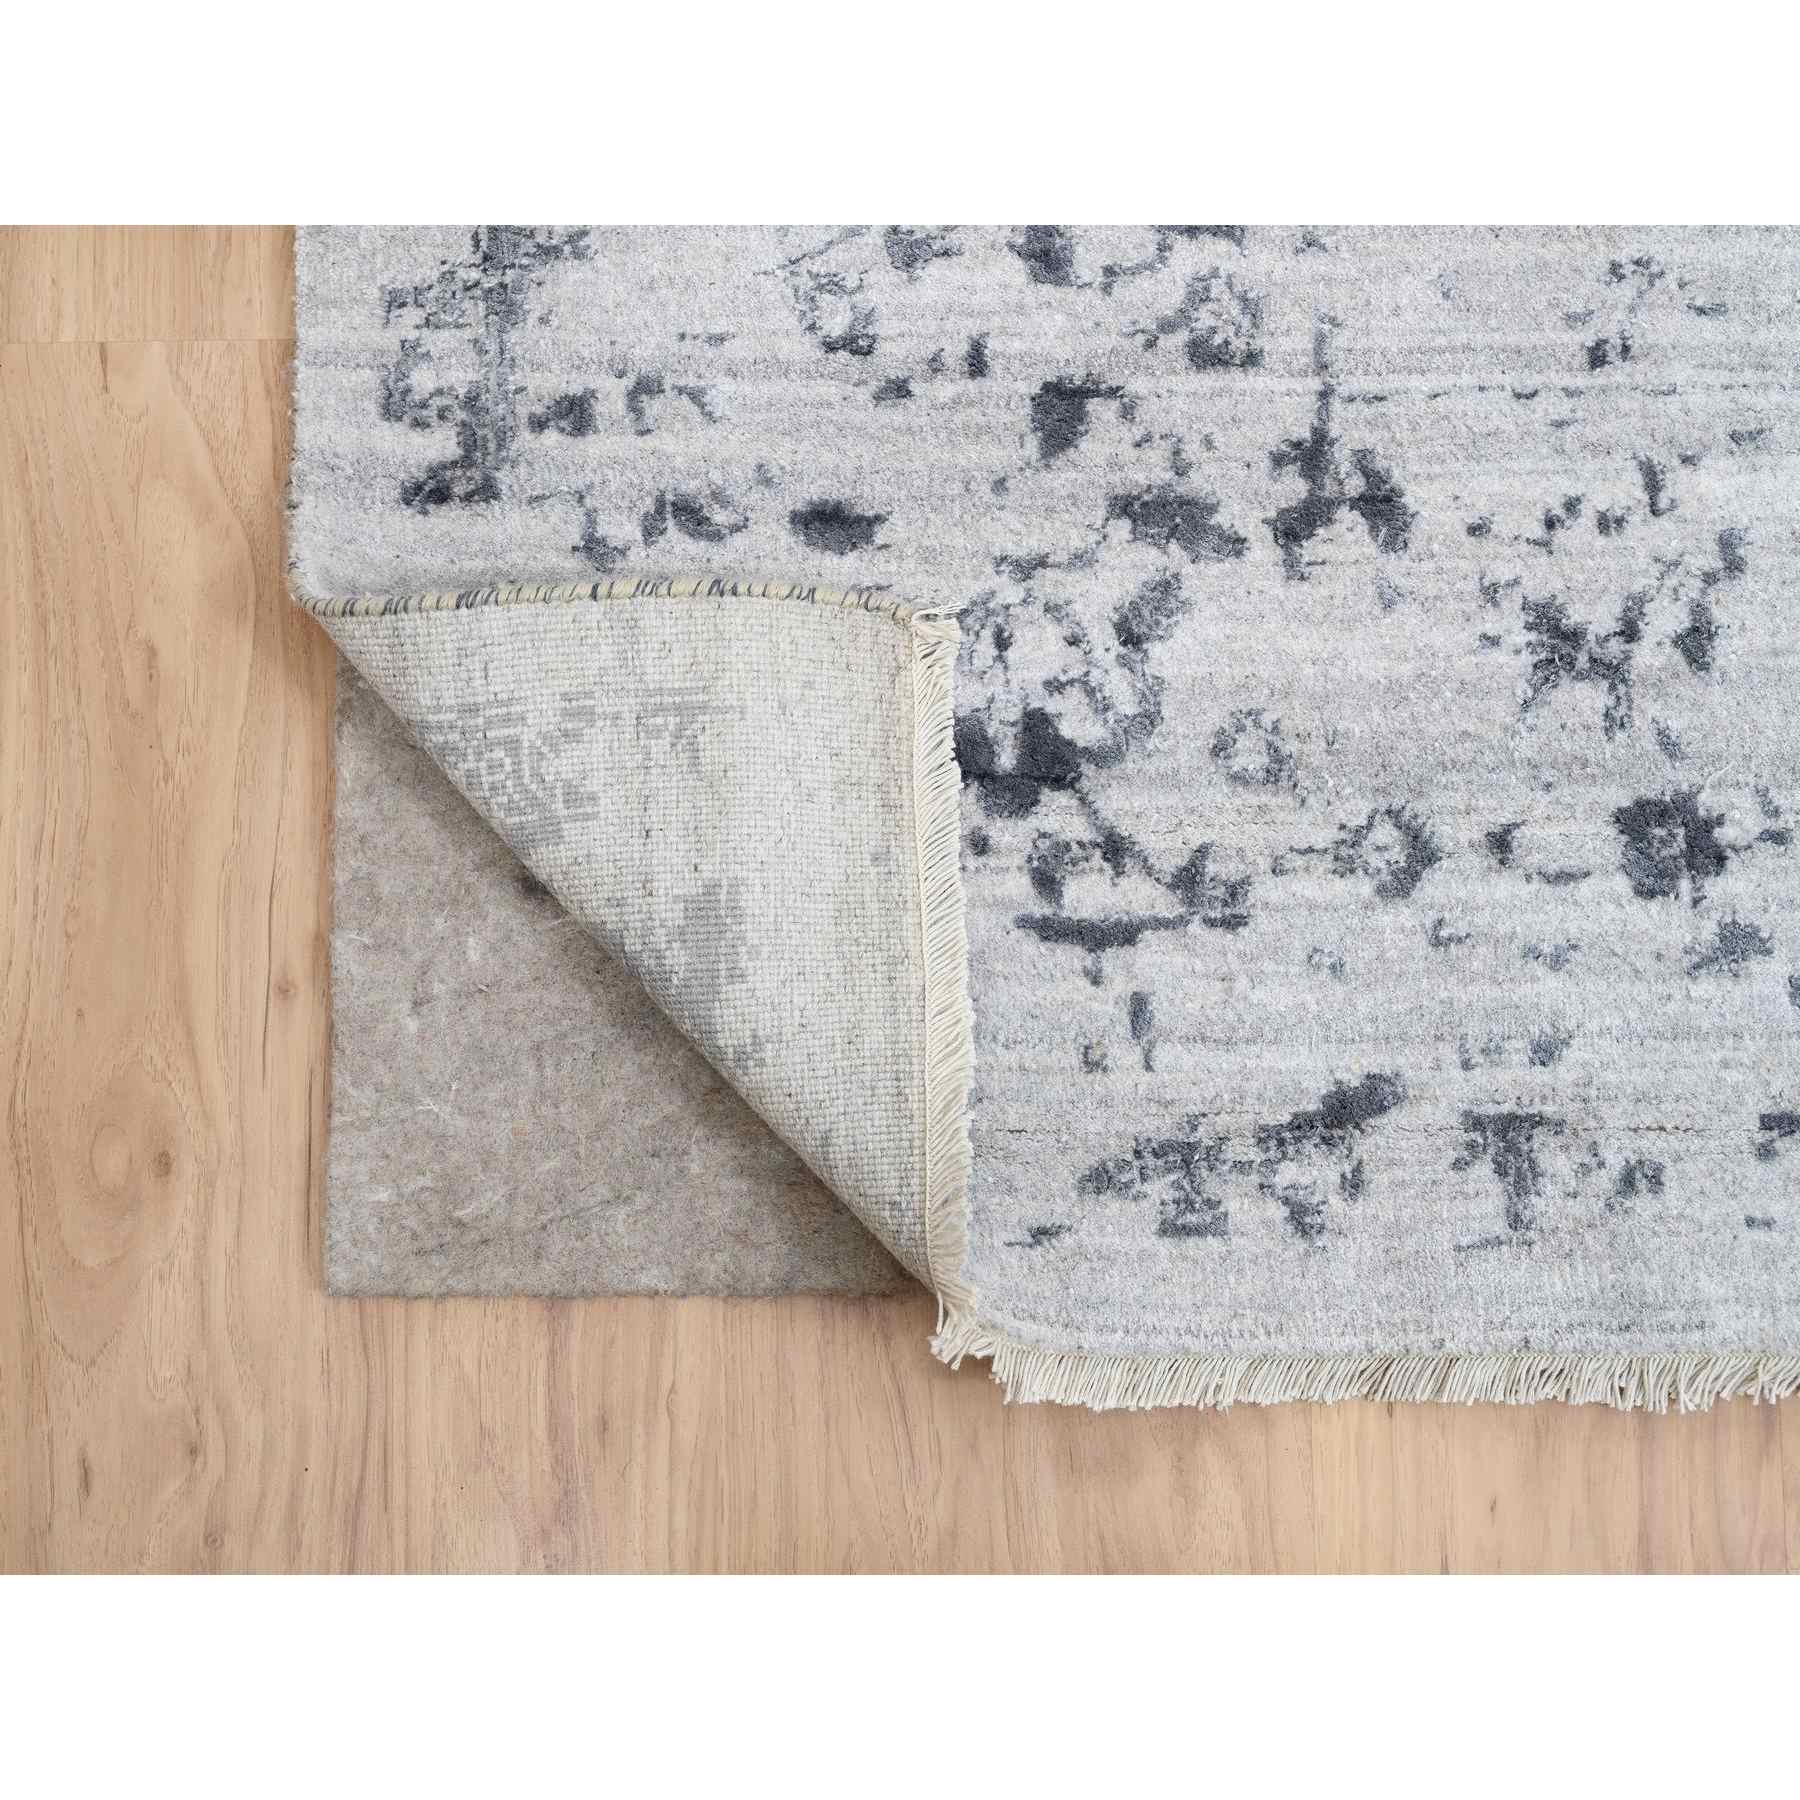 Transitional-Hand-Knotted-Rug-317335